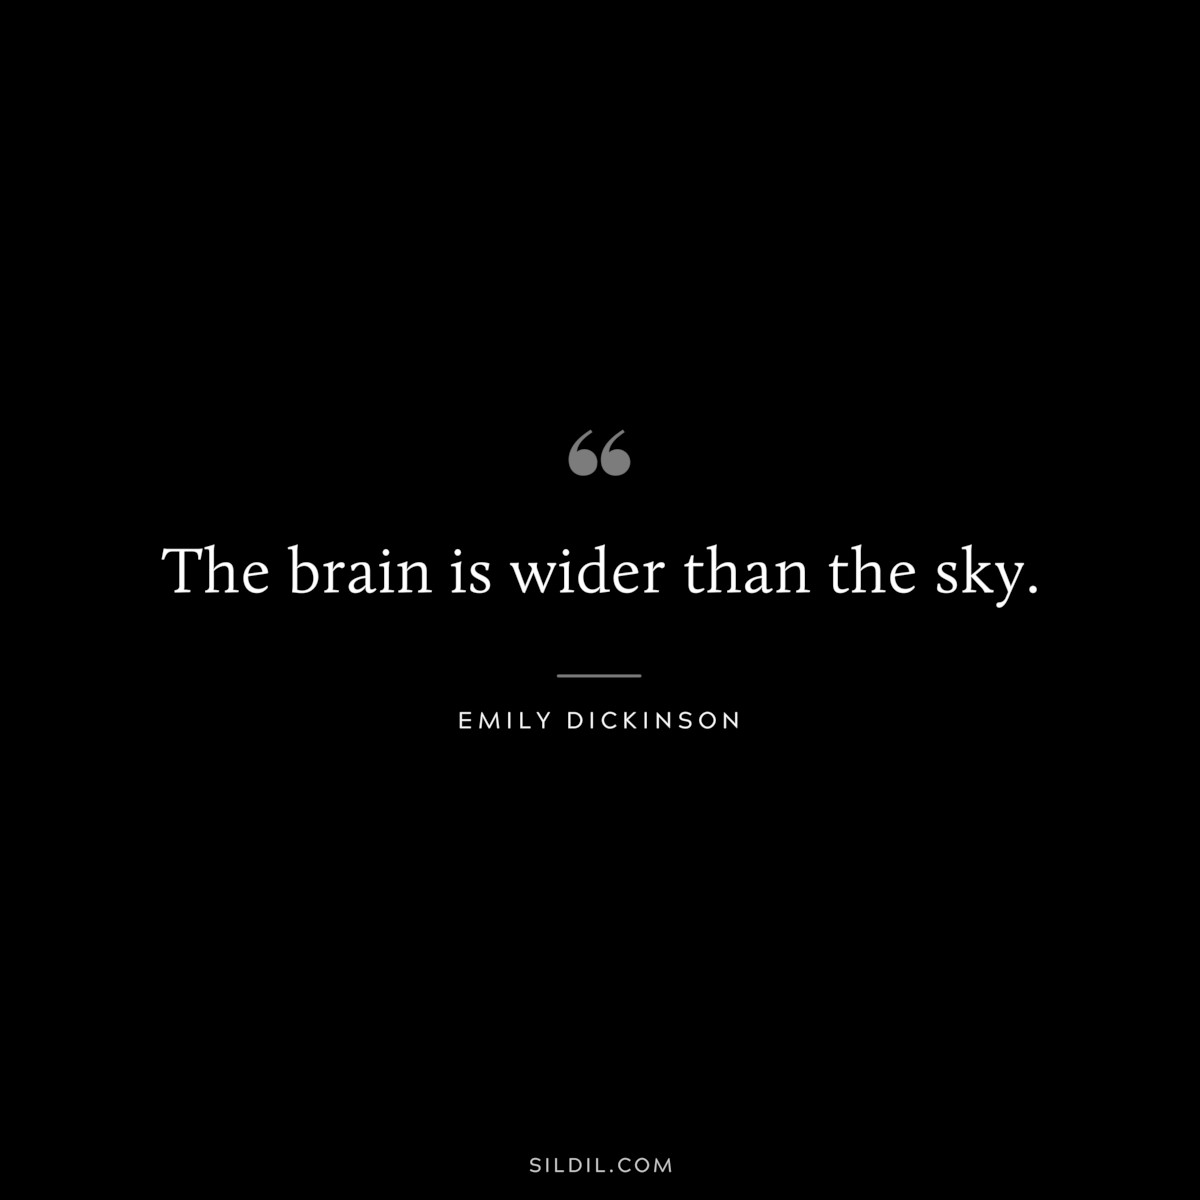 The brain is wider than the sky.